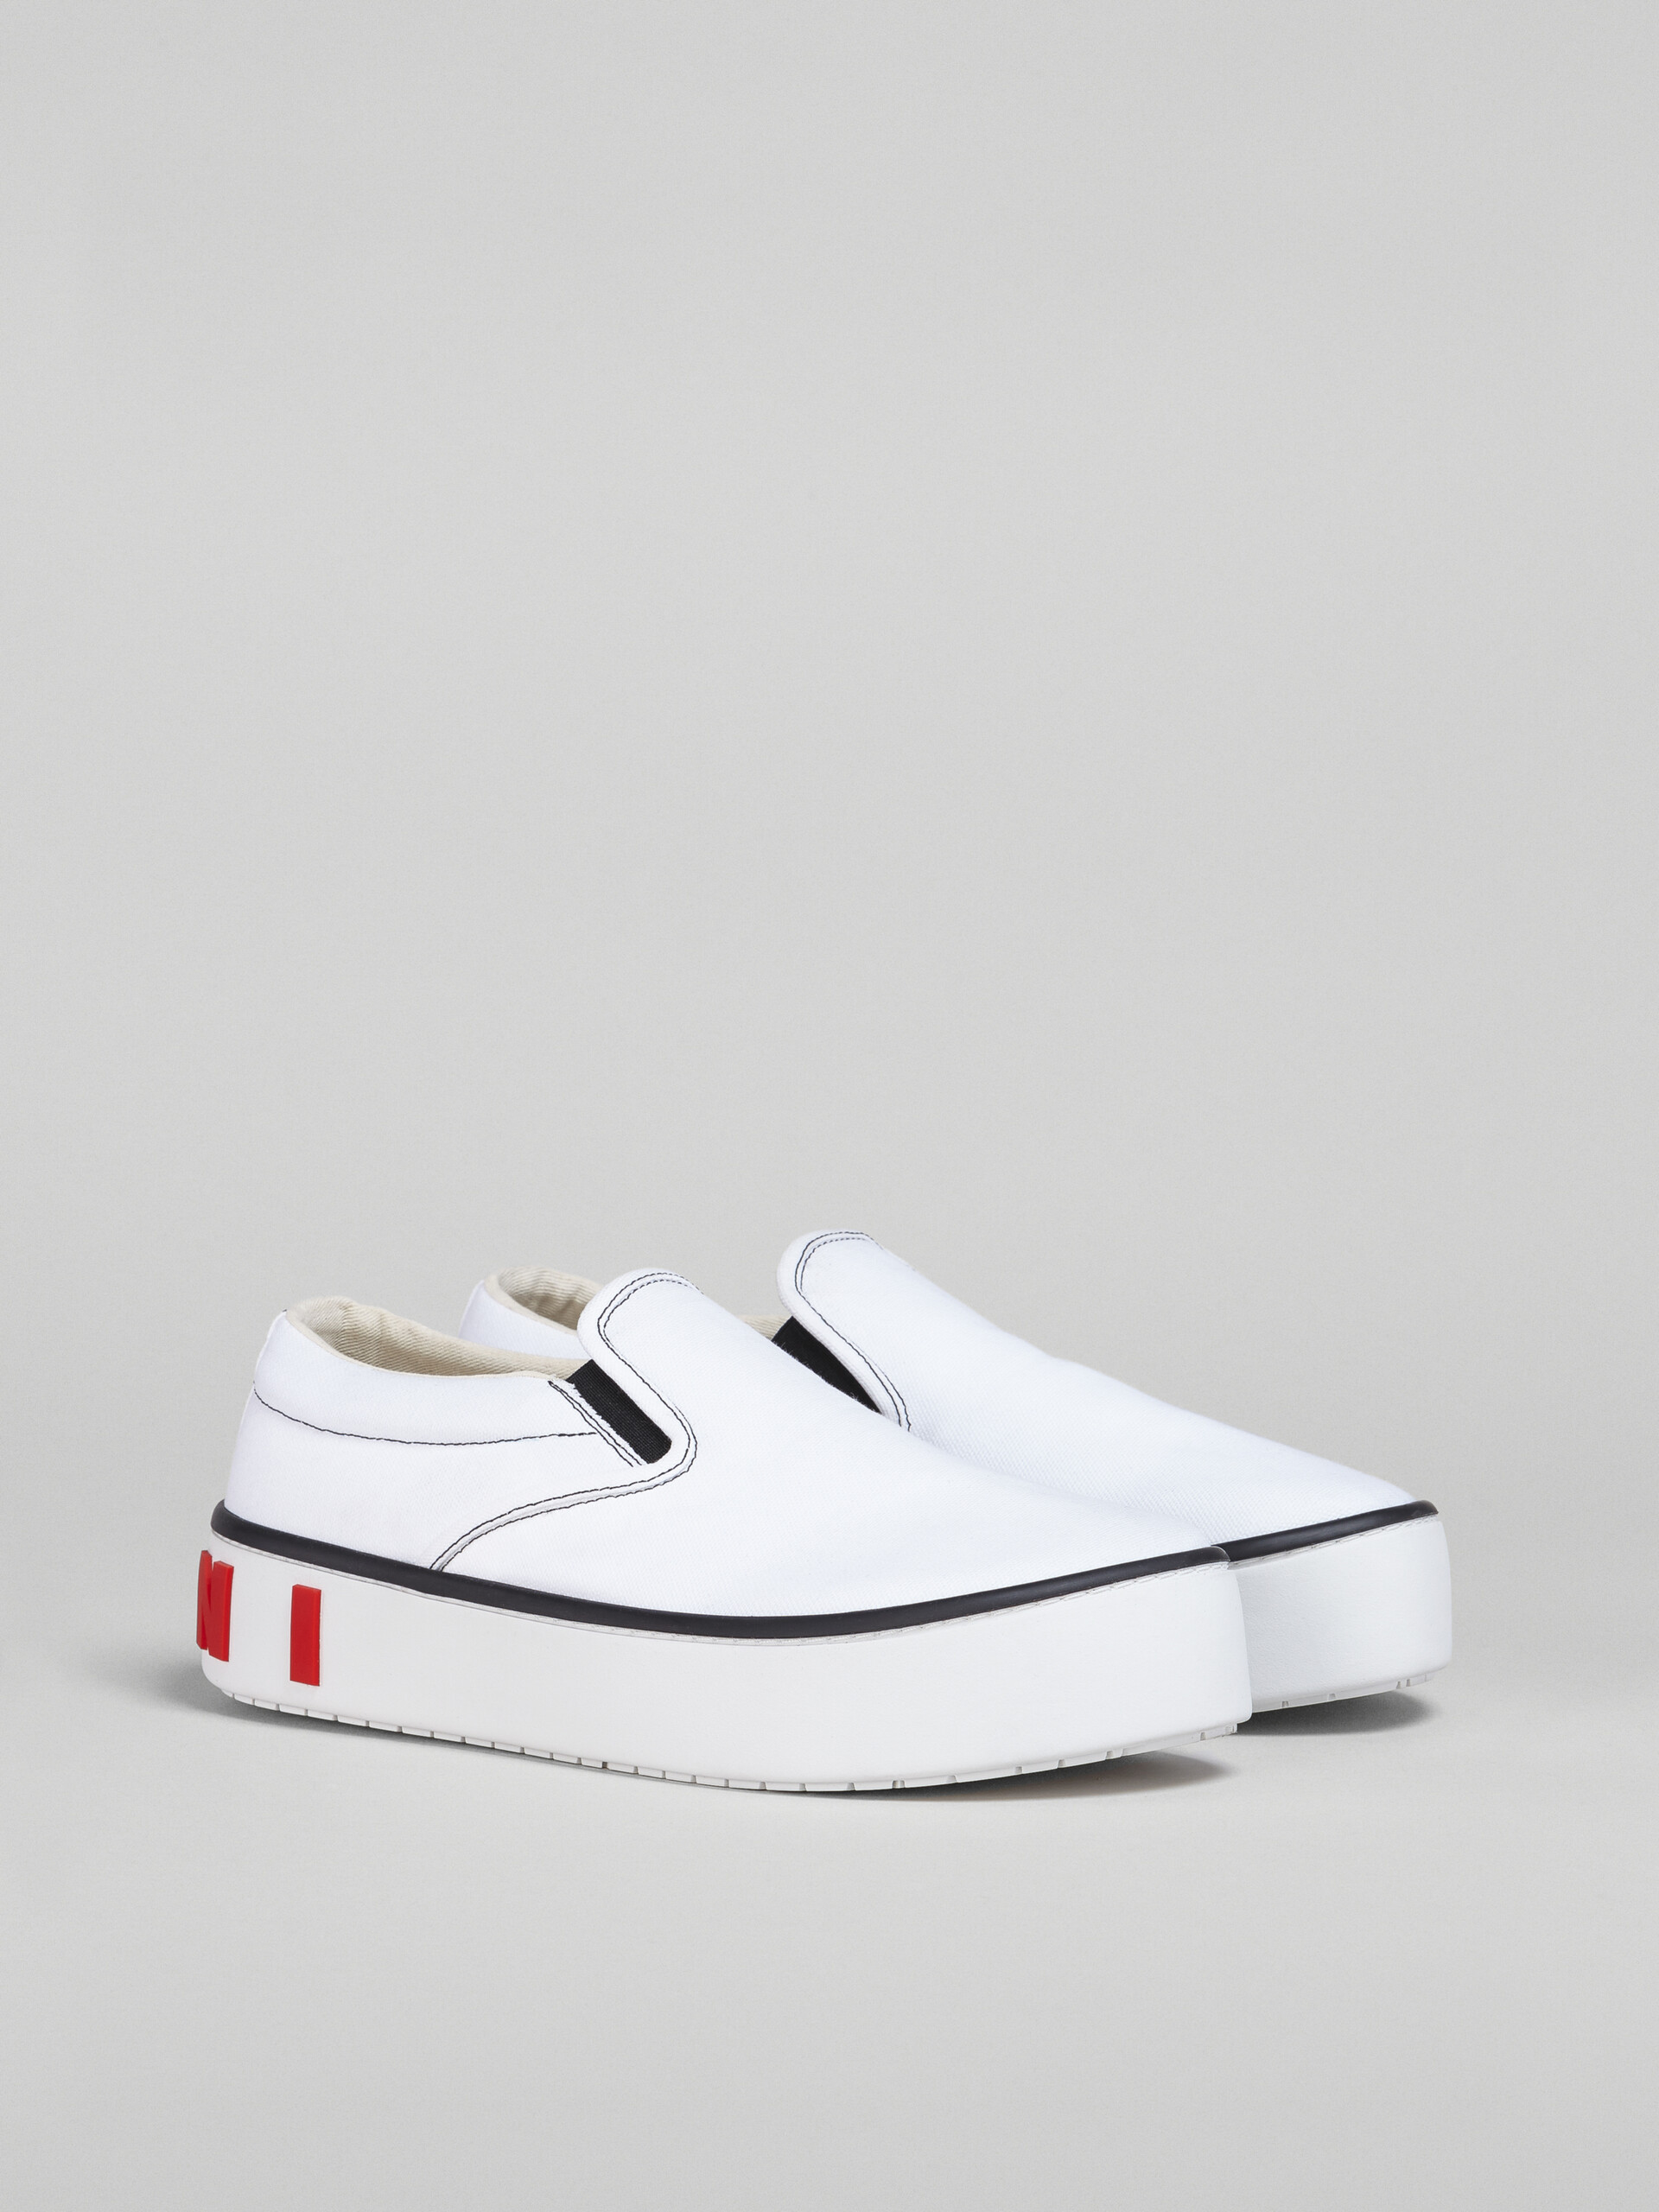 White leather slip-on sneaker with maxi logo - Sneakers - Image 2